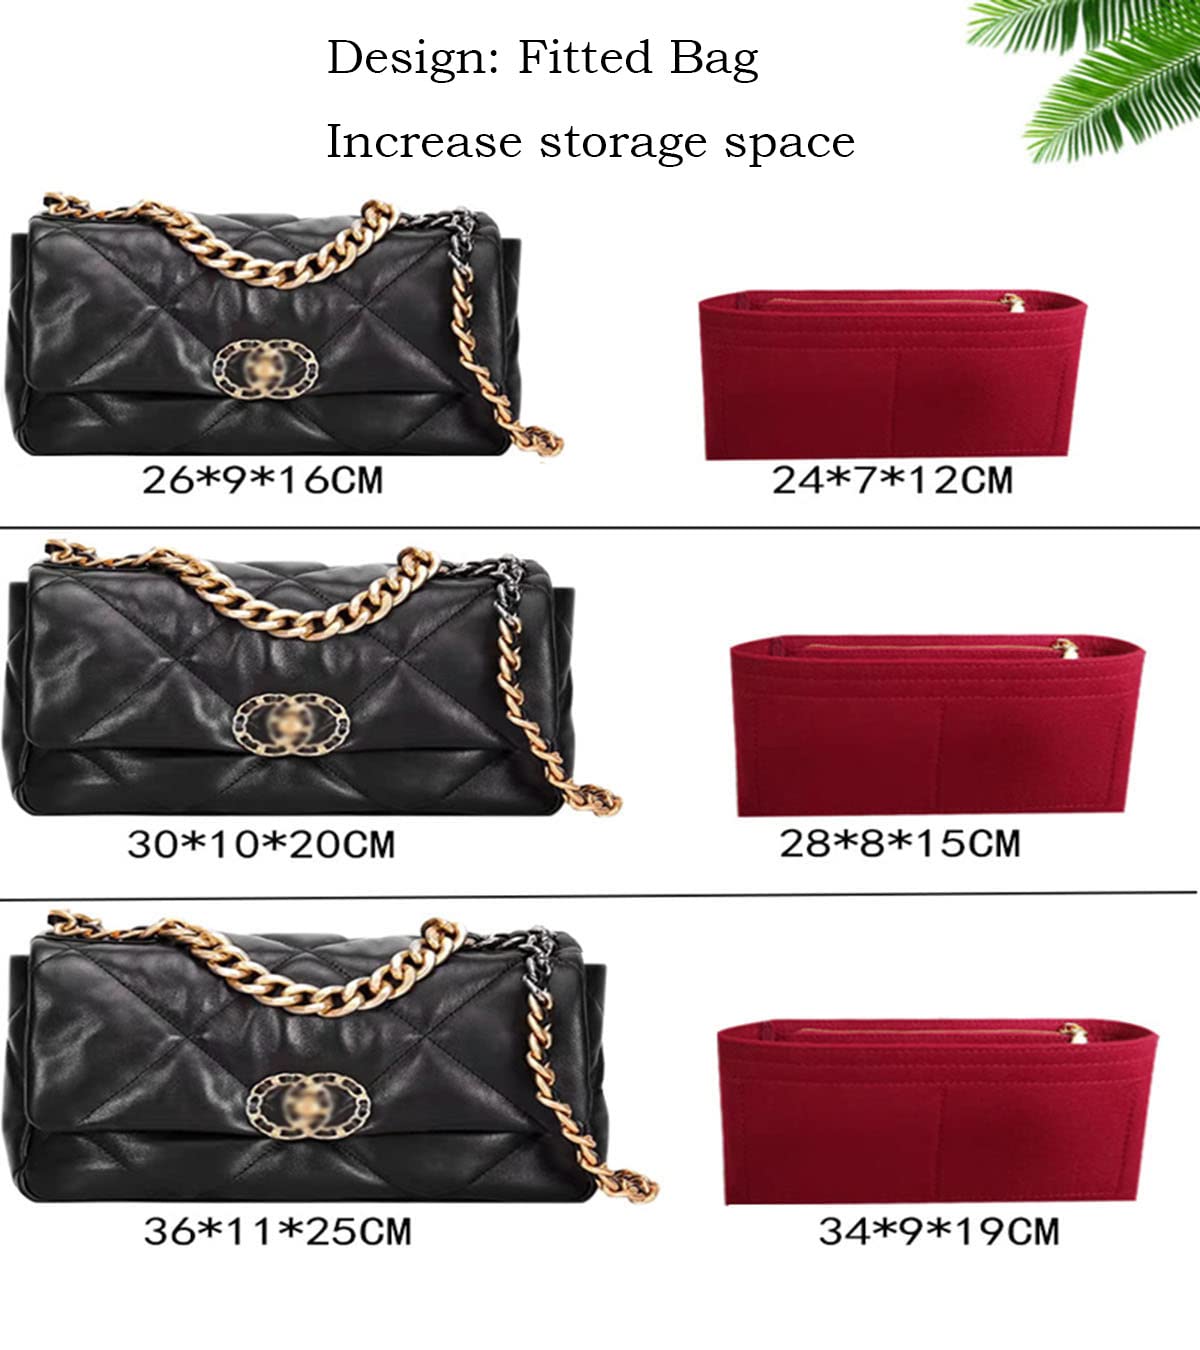 Comparing the Gucci GG Matelassé to the Chanel Classic Flap Bag   sparkleshinylove